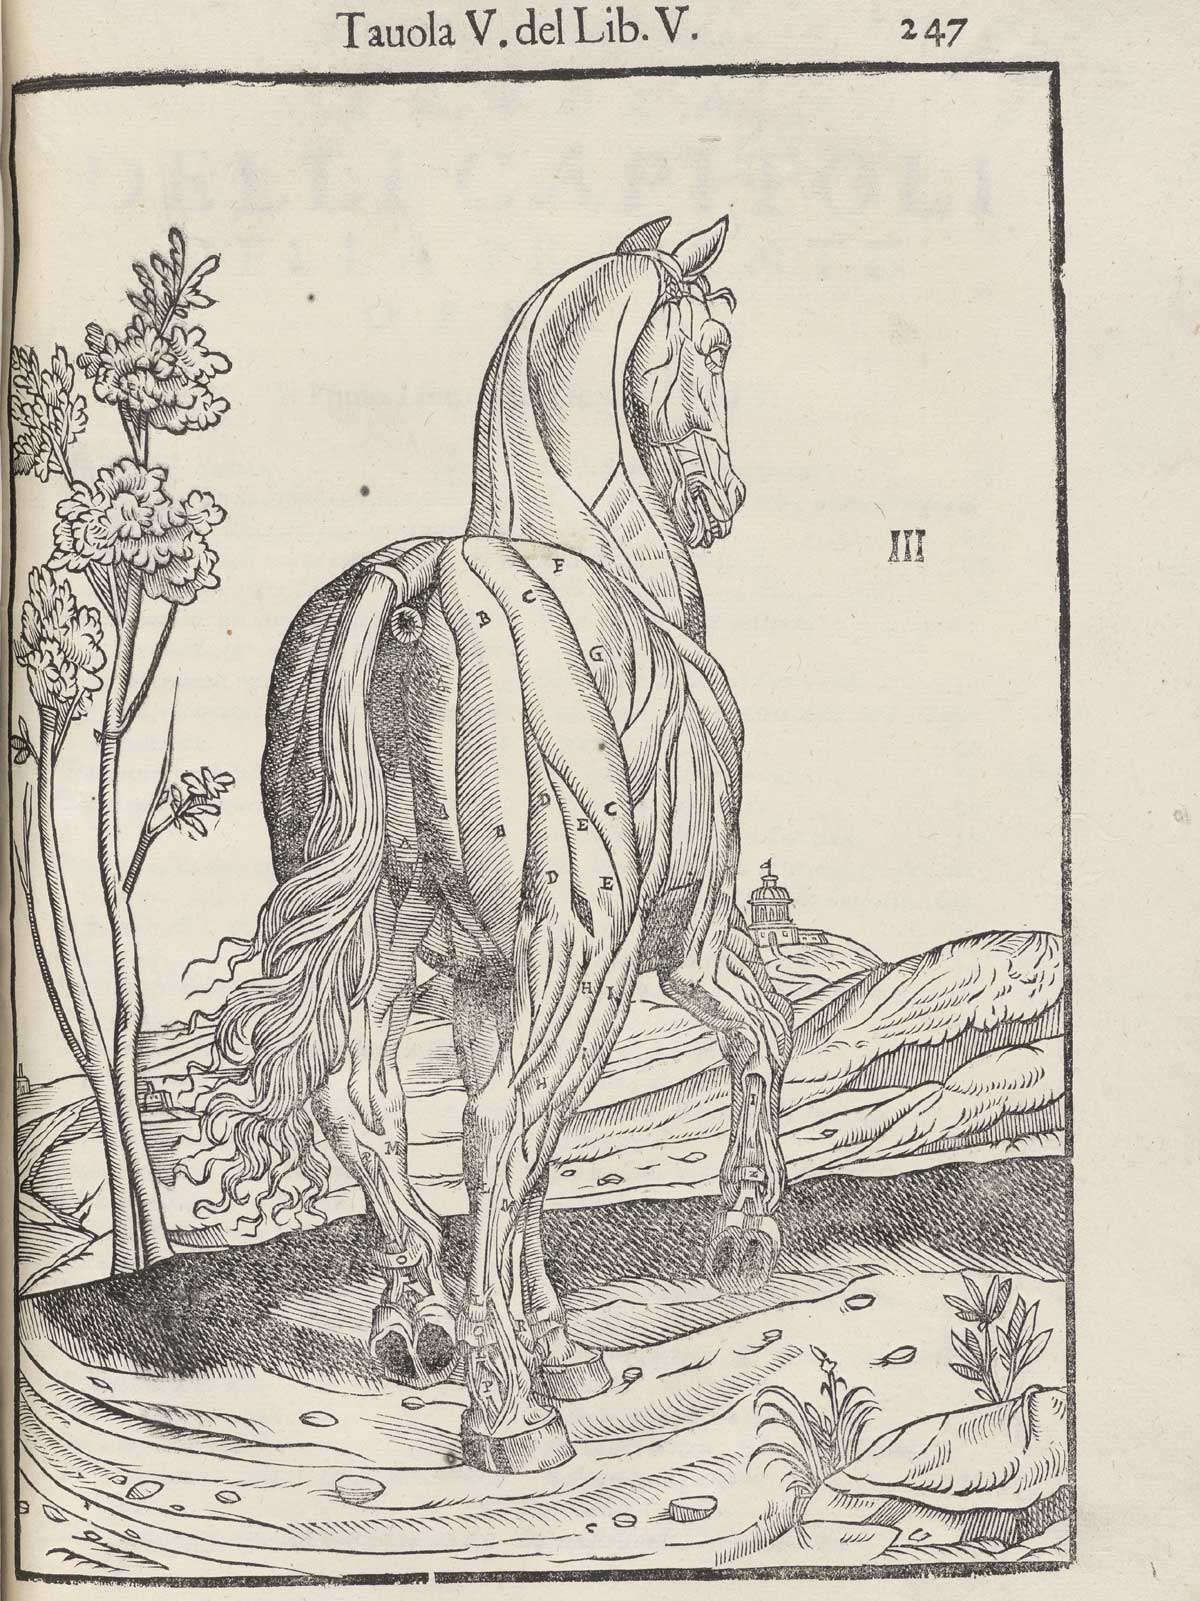 Page 247 of Ruini's Anatomia del cavallo, infermità, et suoi rimedii, featuring the full length rear view of a flayed horse detailing the muscles.